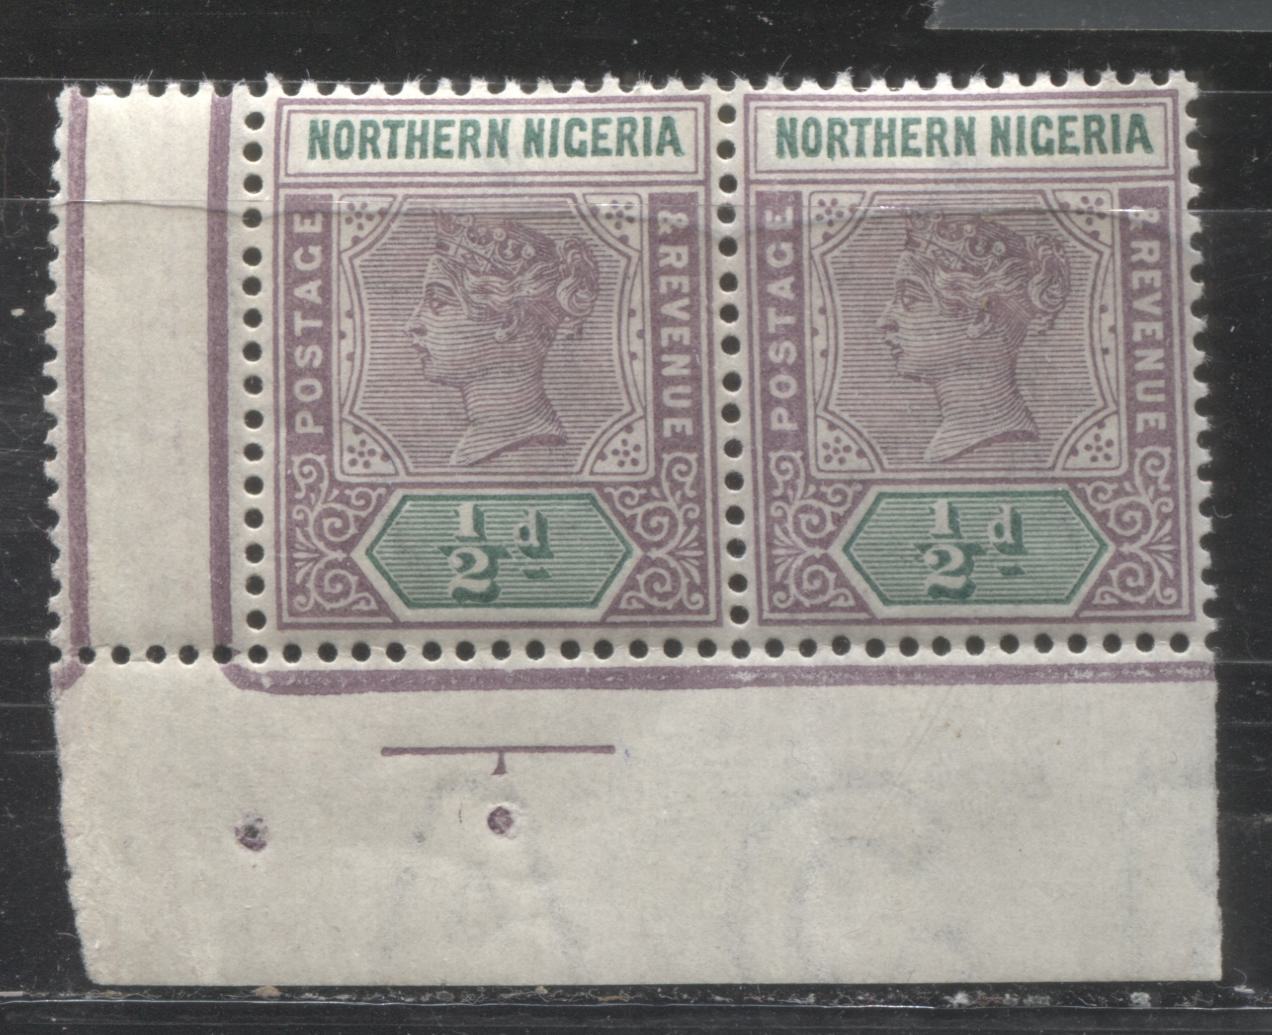 Lot 101 Northern Nigeria SG#1 1/2d Slate Lilac & Green and Pale Slate Lilac & Green Queen Victoria 1900-1902 Imperium Keyplate Issue, A VFNH Lower Left Margin Corner Pair, 113,640 Issued, SG Cat. 15 GBP = Approximately $25.5 For Fine OG, Est. $45